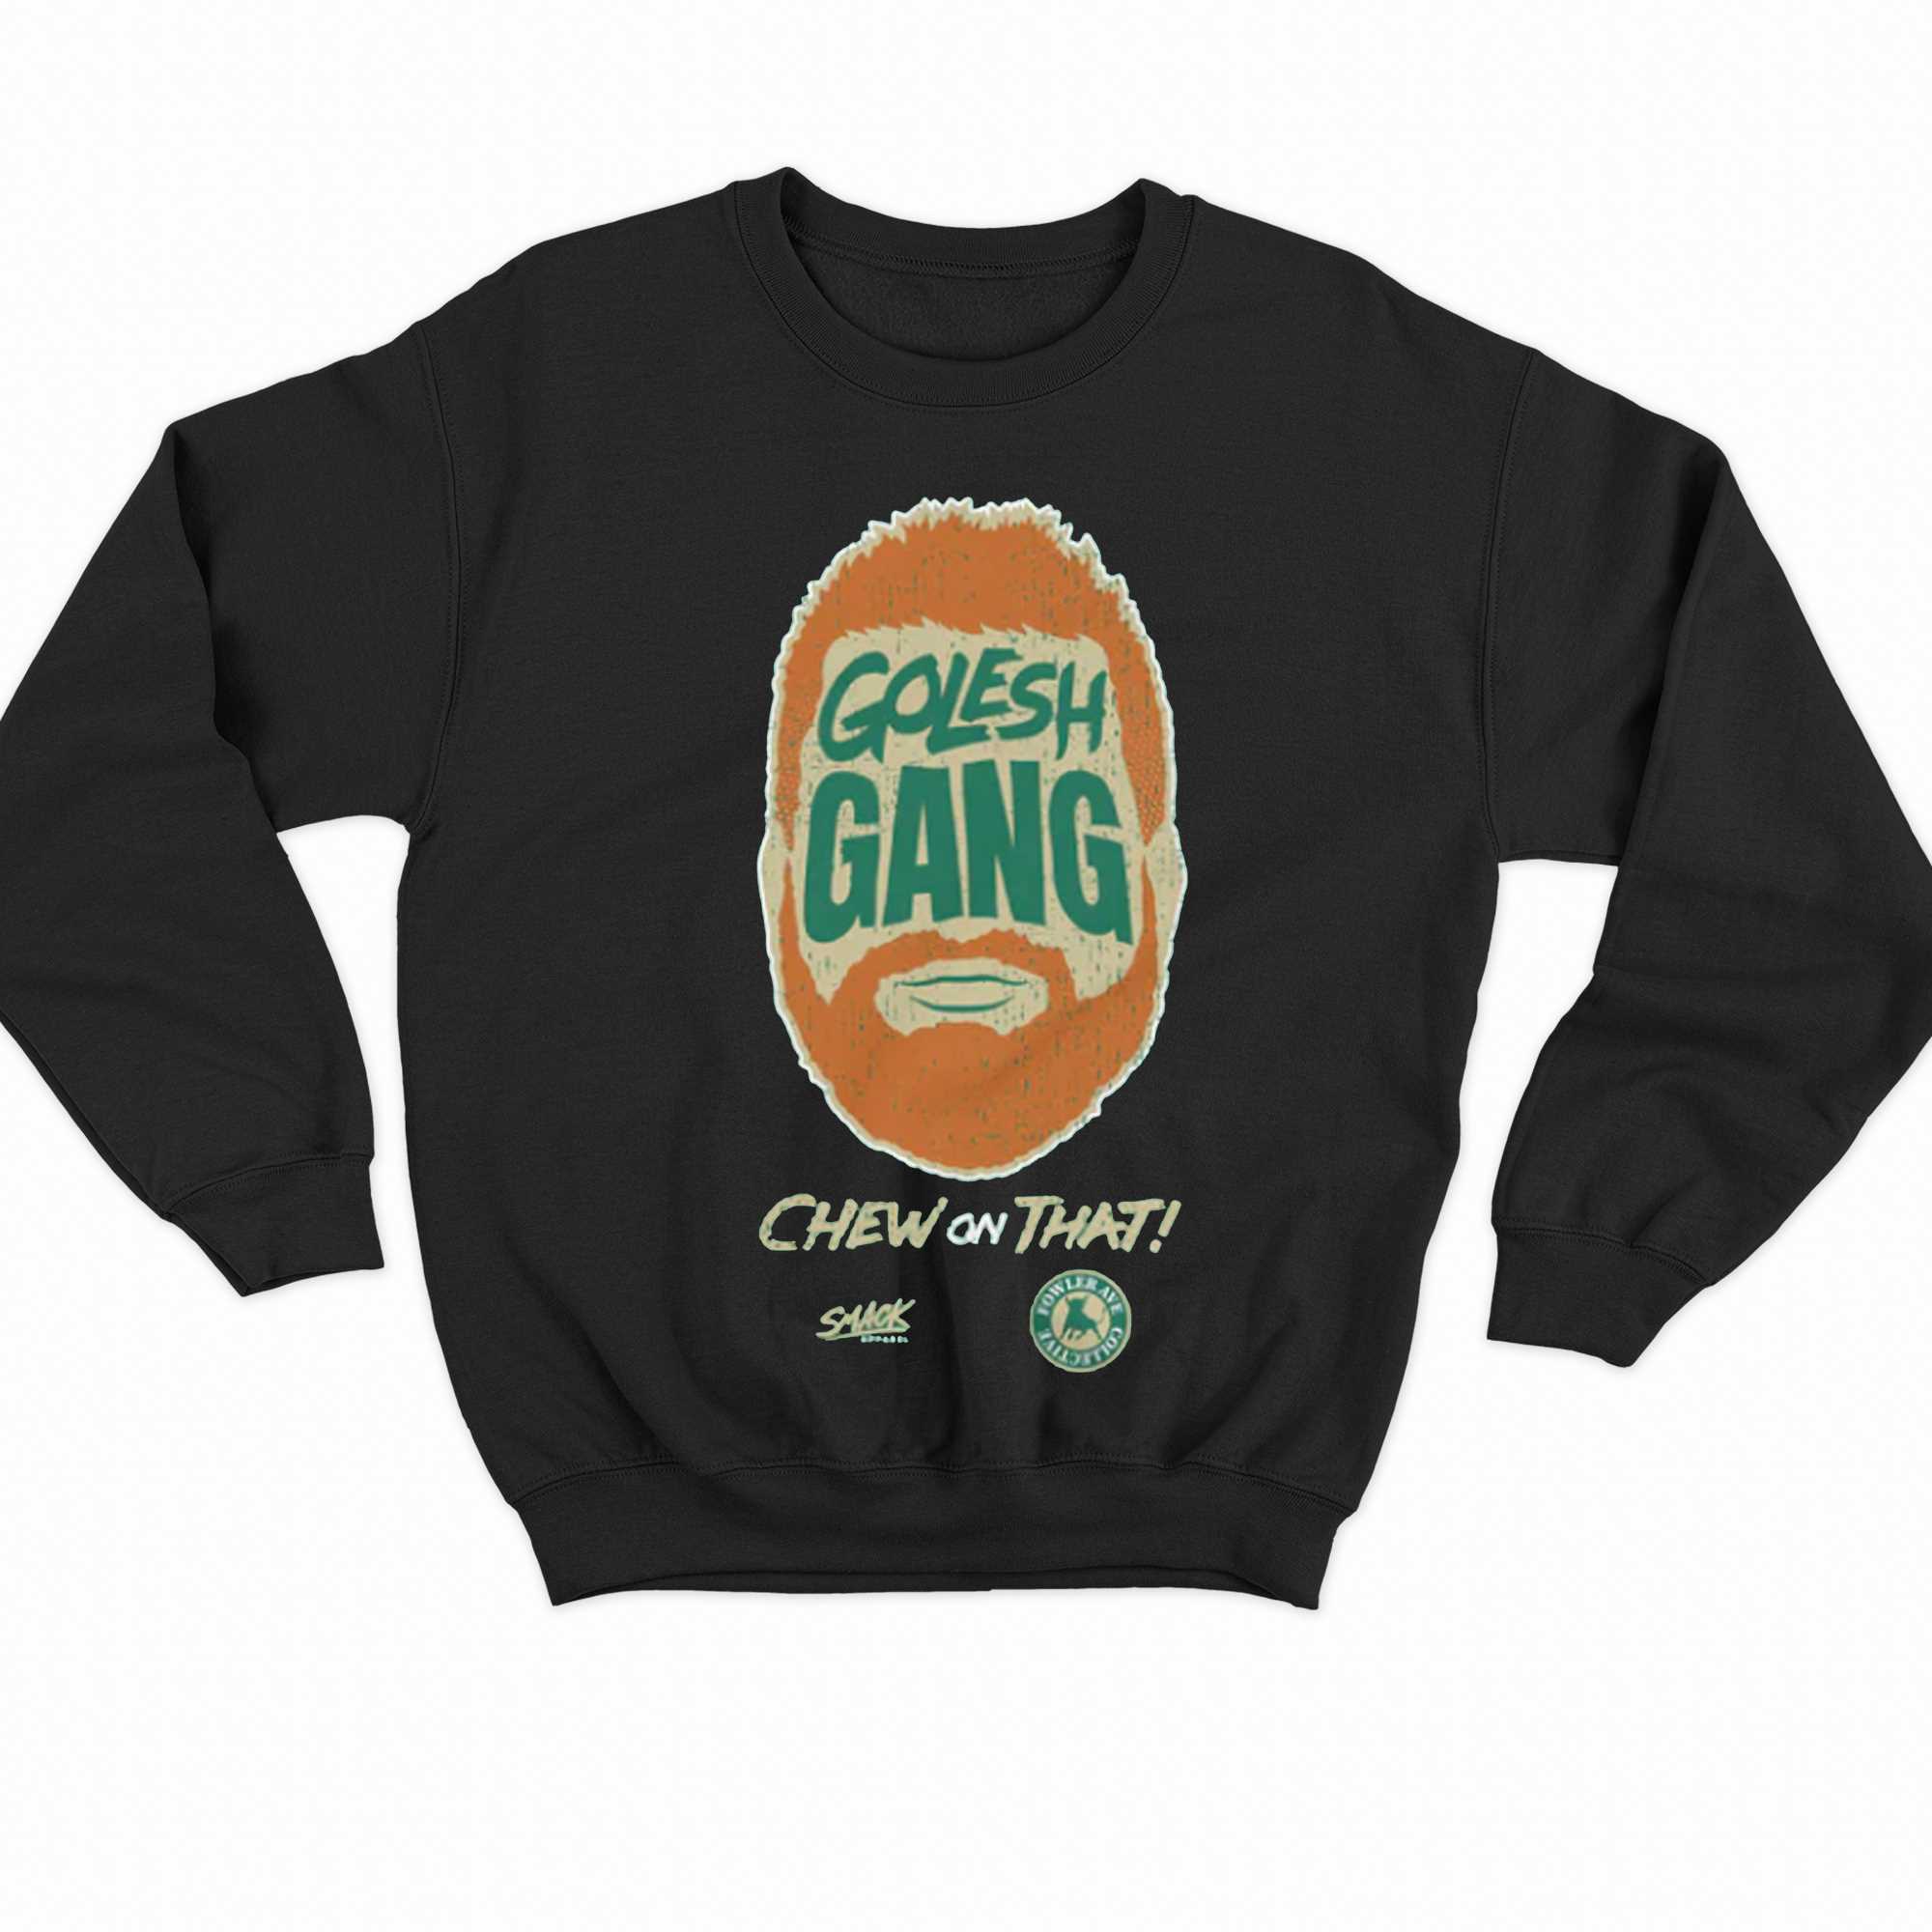 Golesh Gang T-shirt For South Florida College Fans 